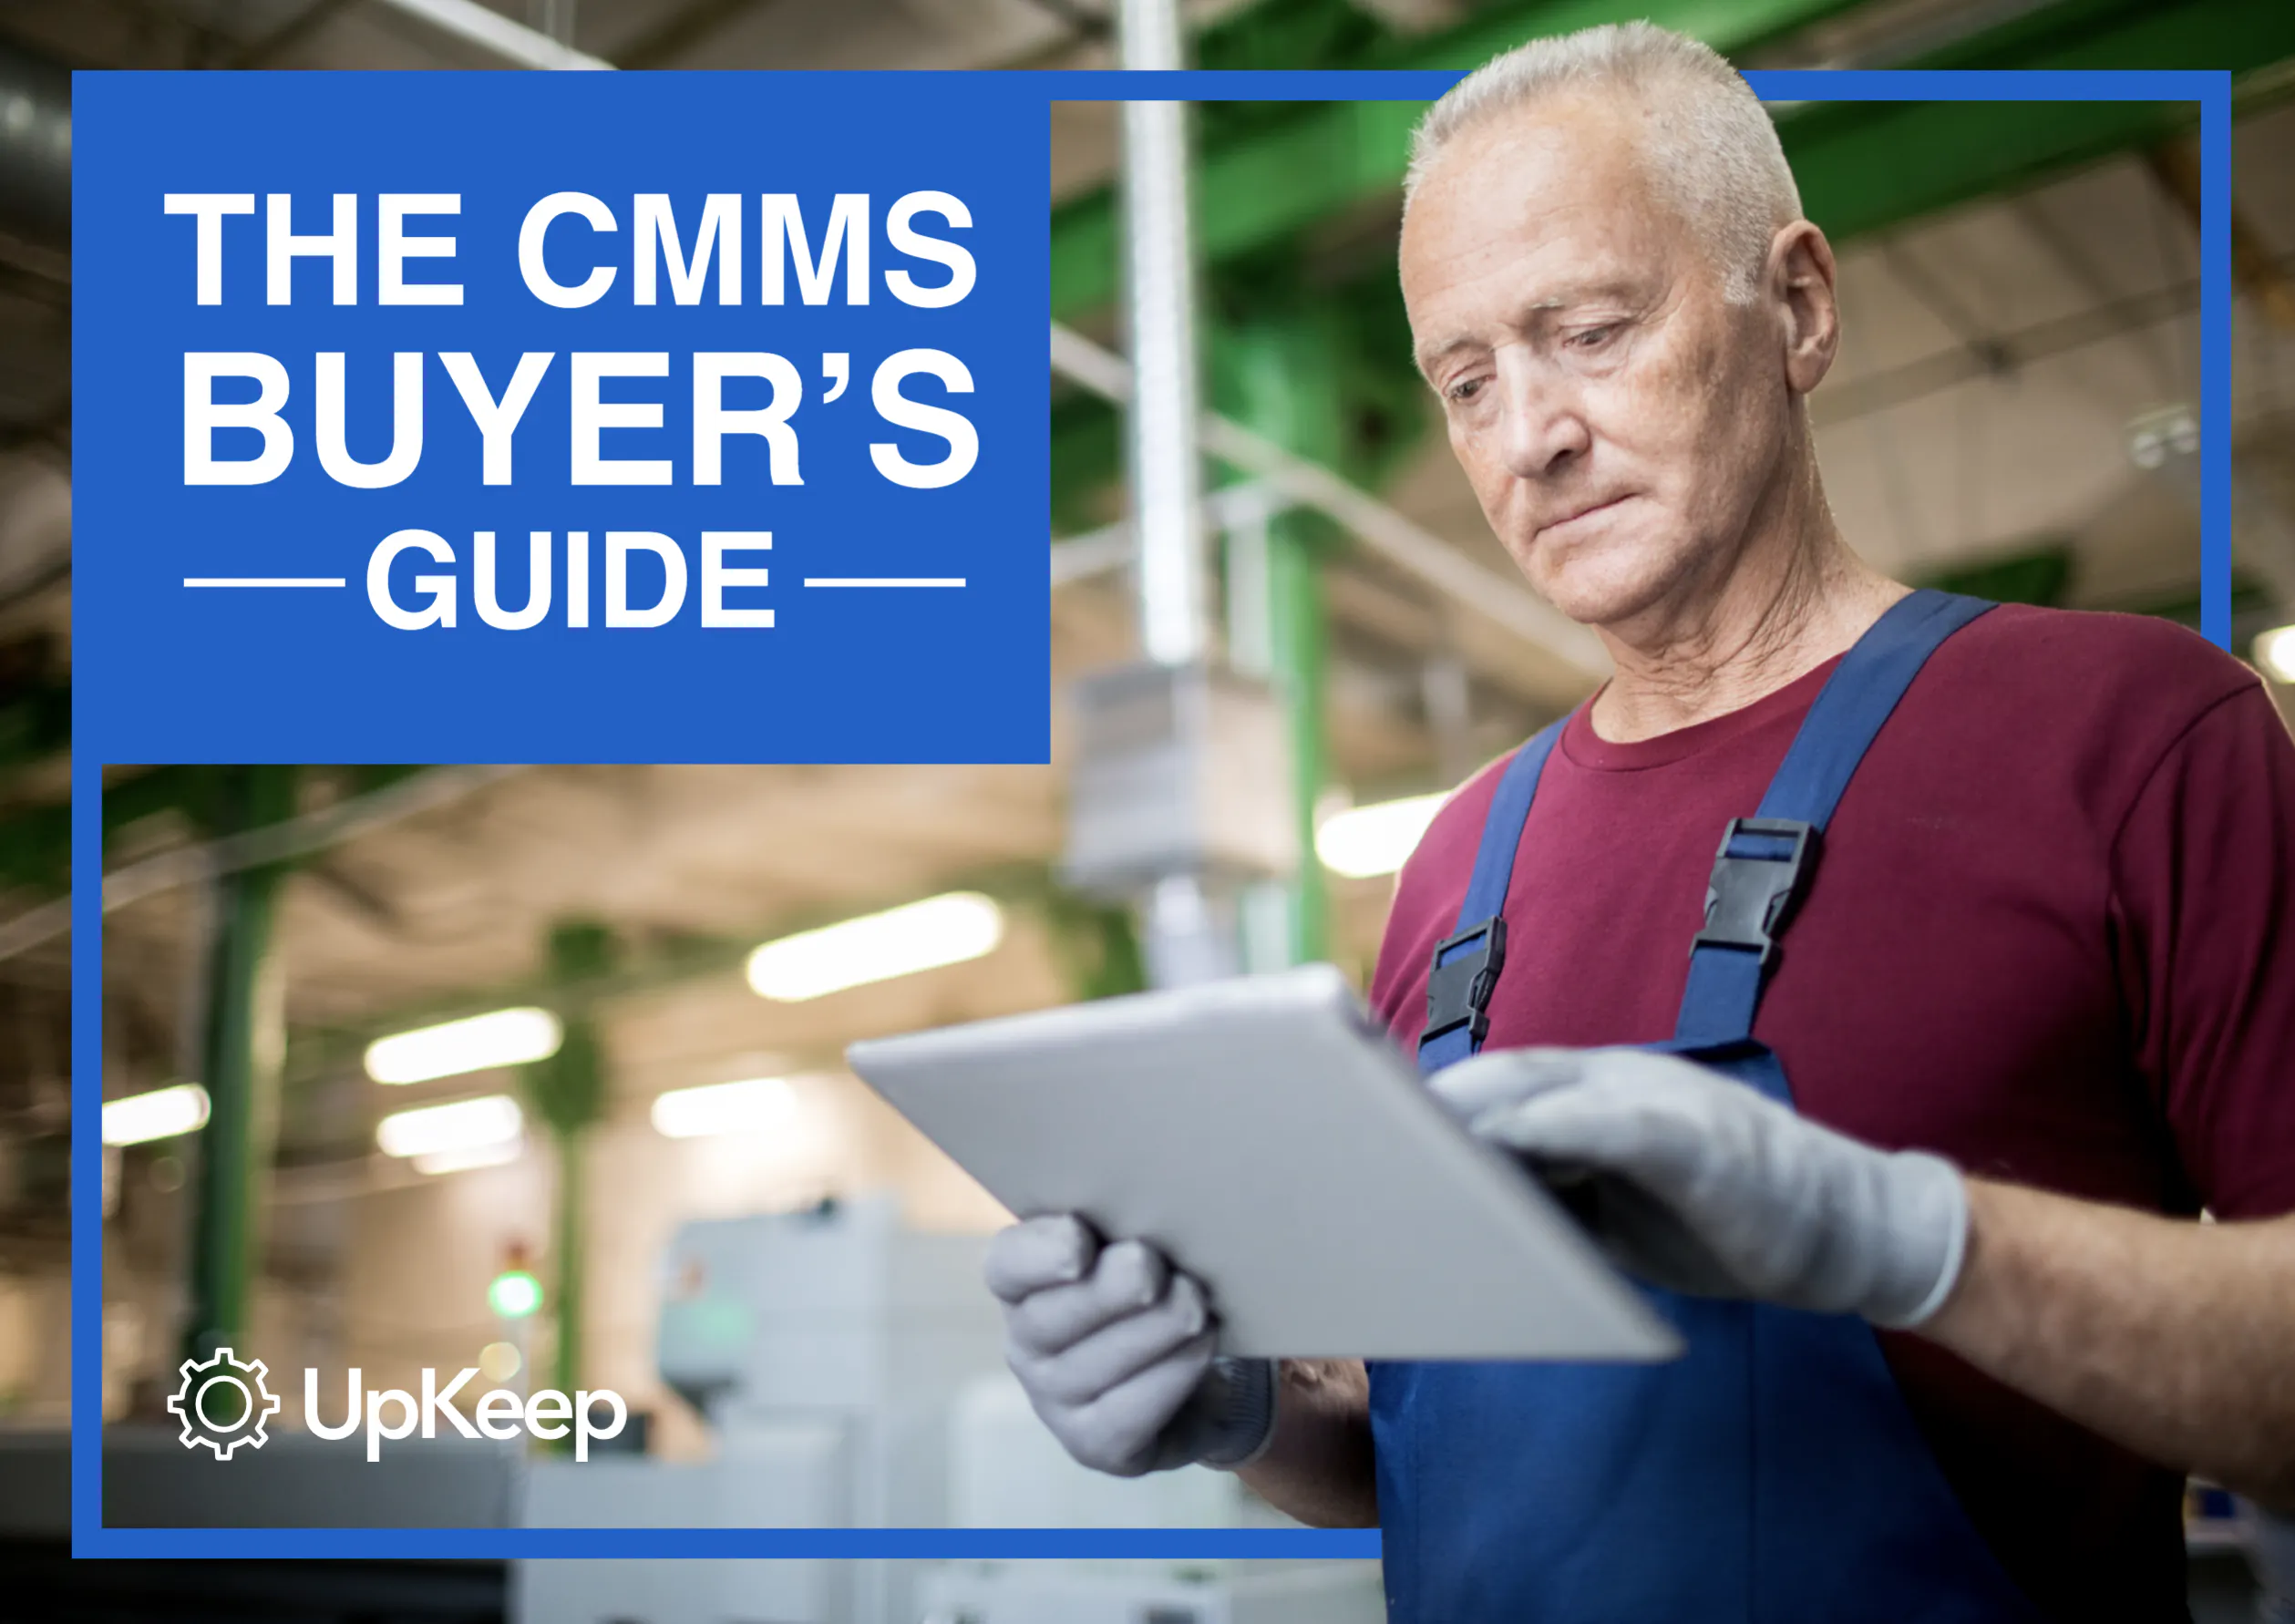 The CMMS Buyer's Guide